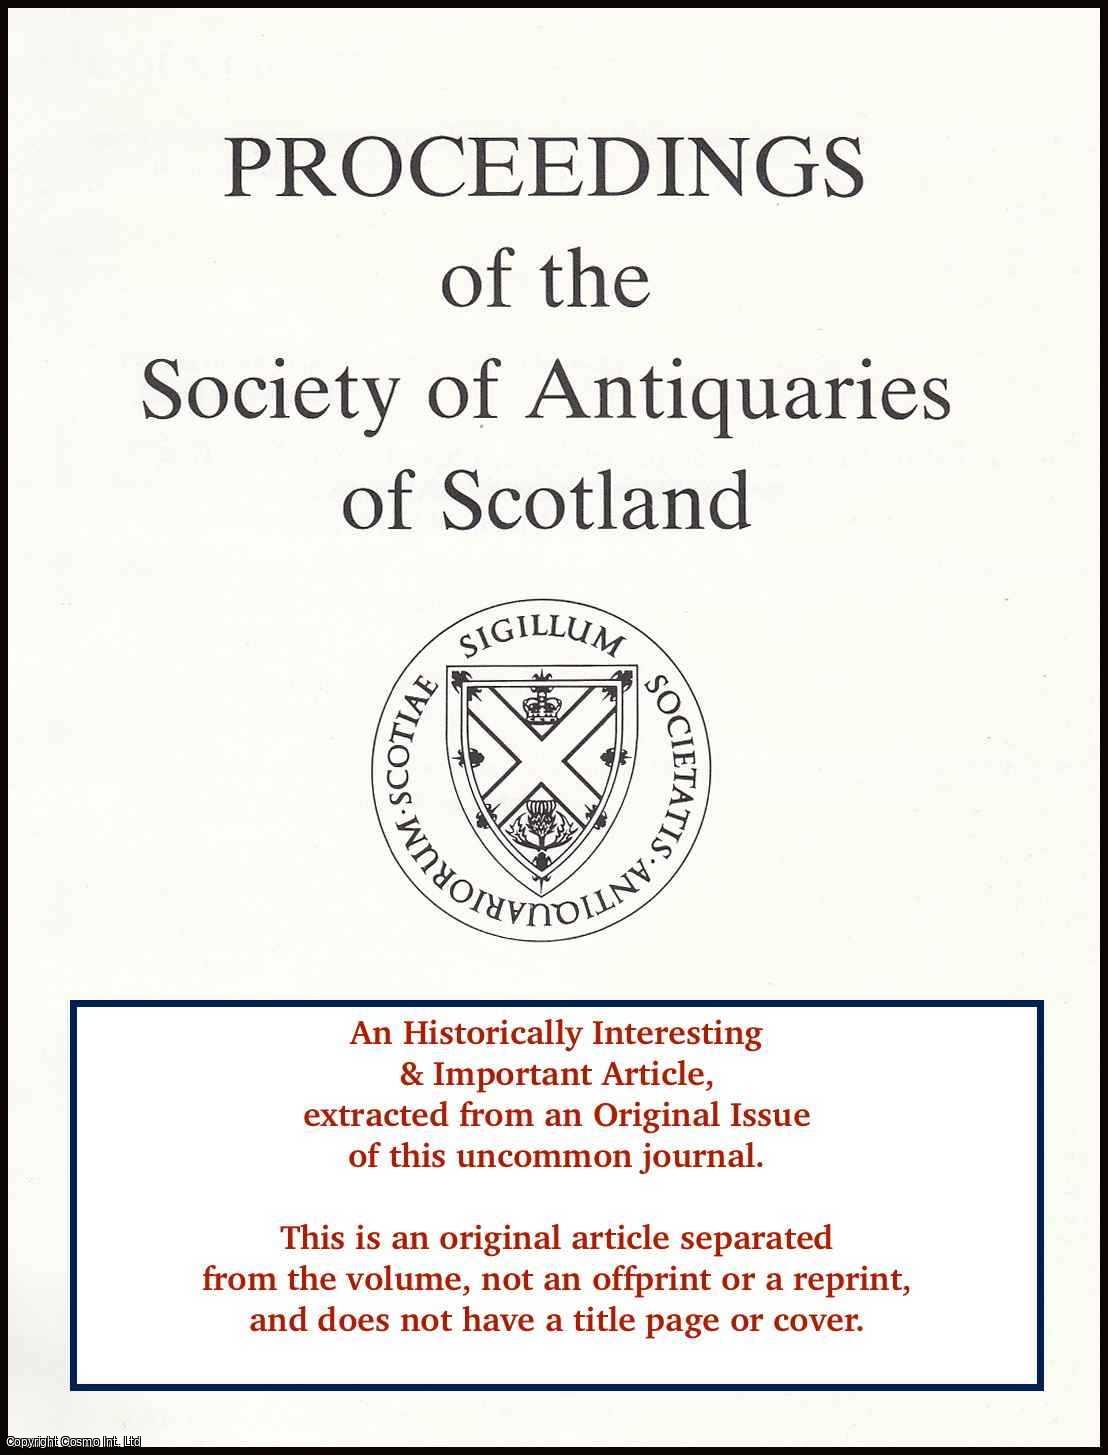 Anne Crone & John Barber - Analytical Techniques for The Investigation of non-Artefactual Wood from Prehistoric and Medieval Sites. An original article from the Society of Antiquaries of Scotland, 1981.